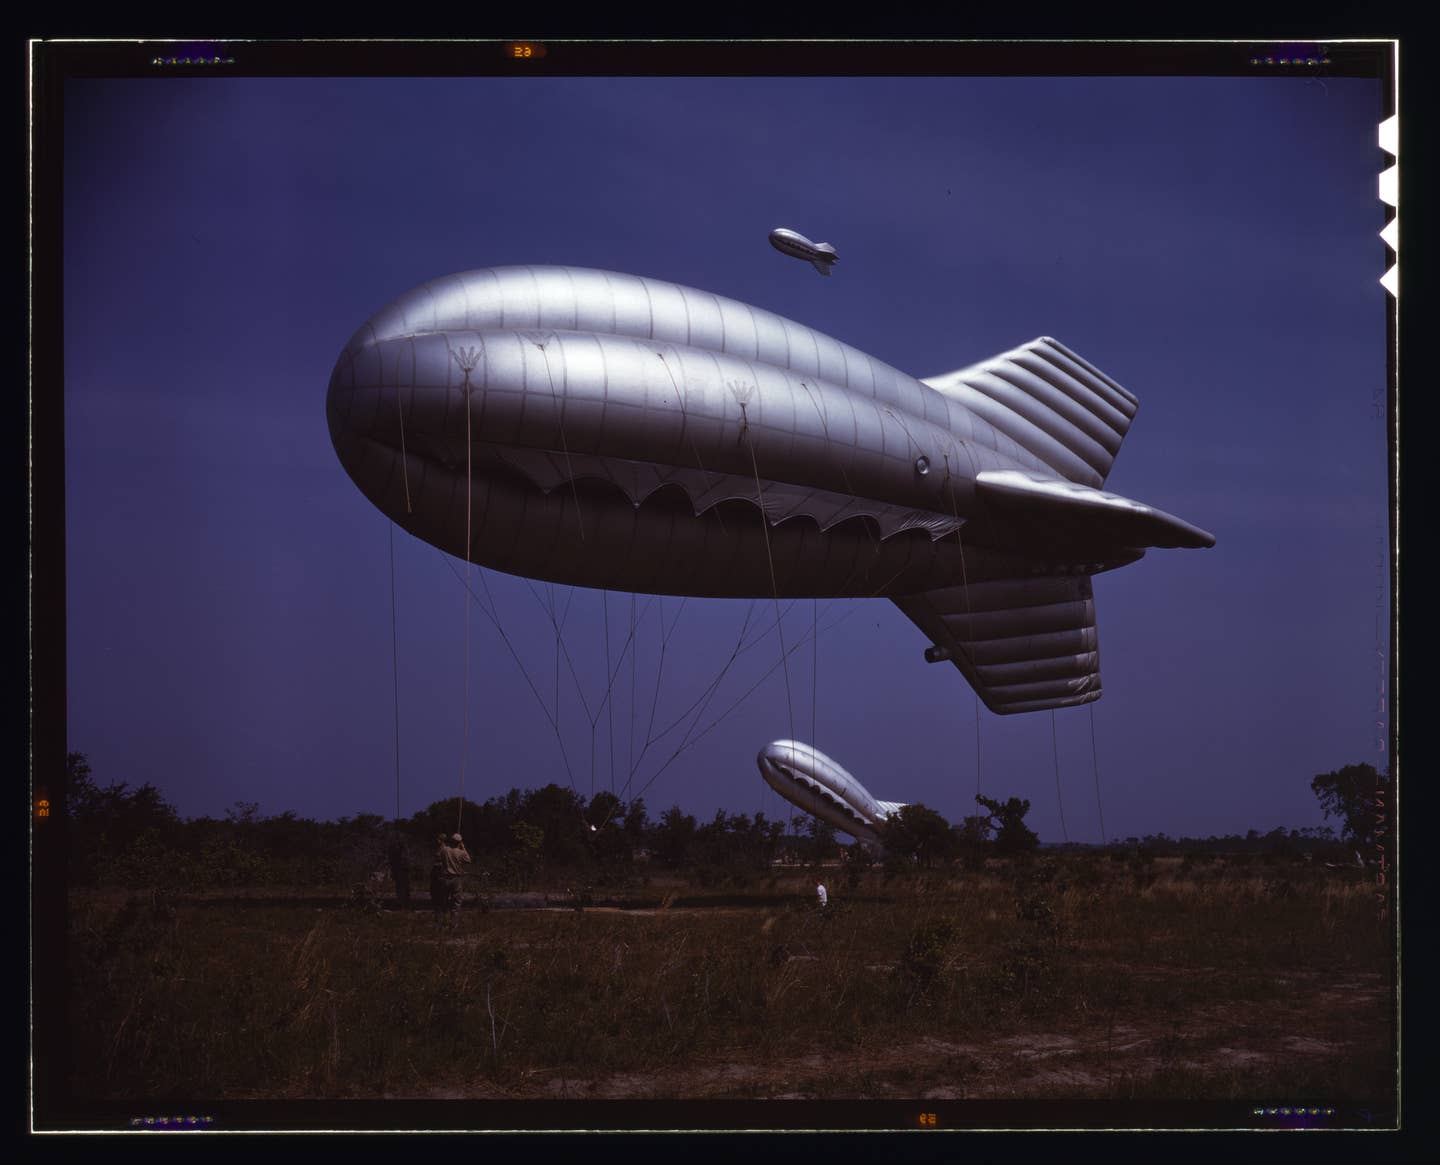 Another example of a World War II-era barrage balloon, this time with its steel cord netting in clear view. (Credit: Palmer, Alfred T./Wikimedia Commons)